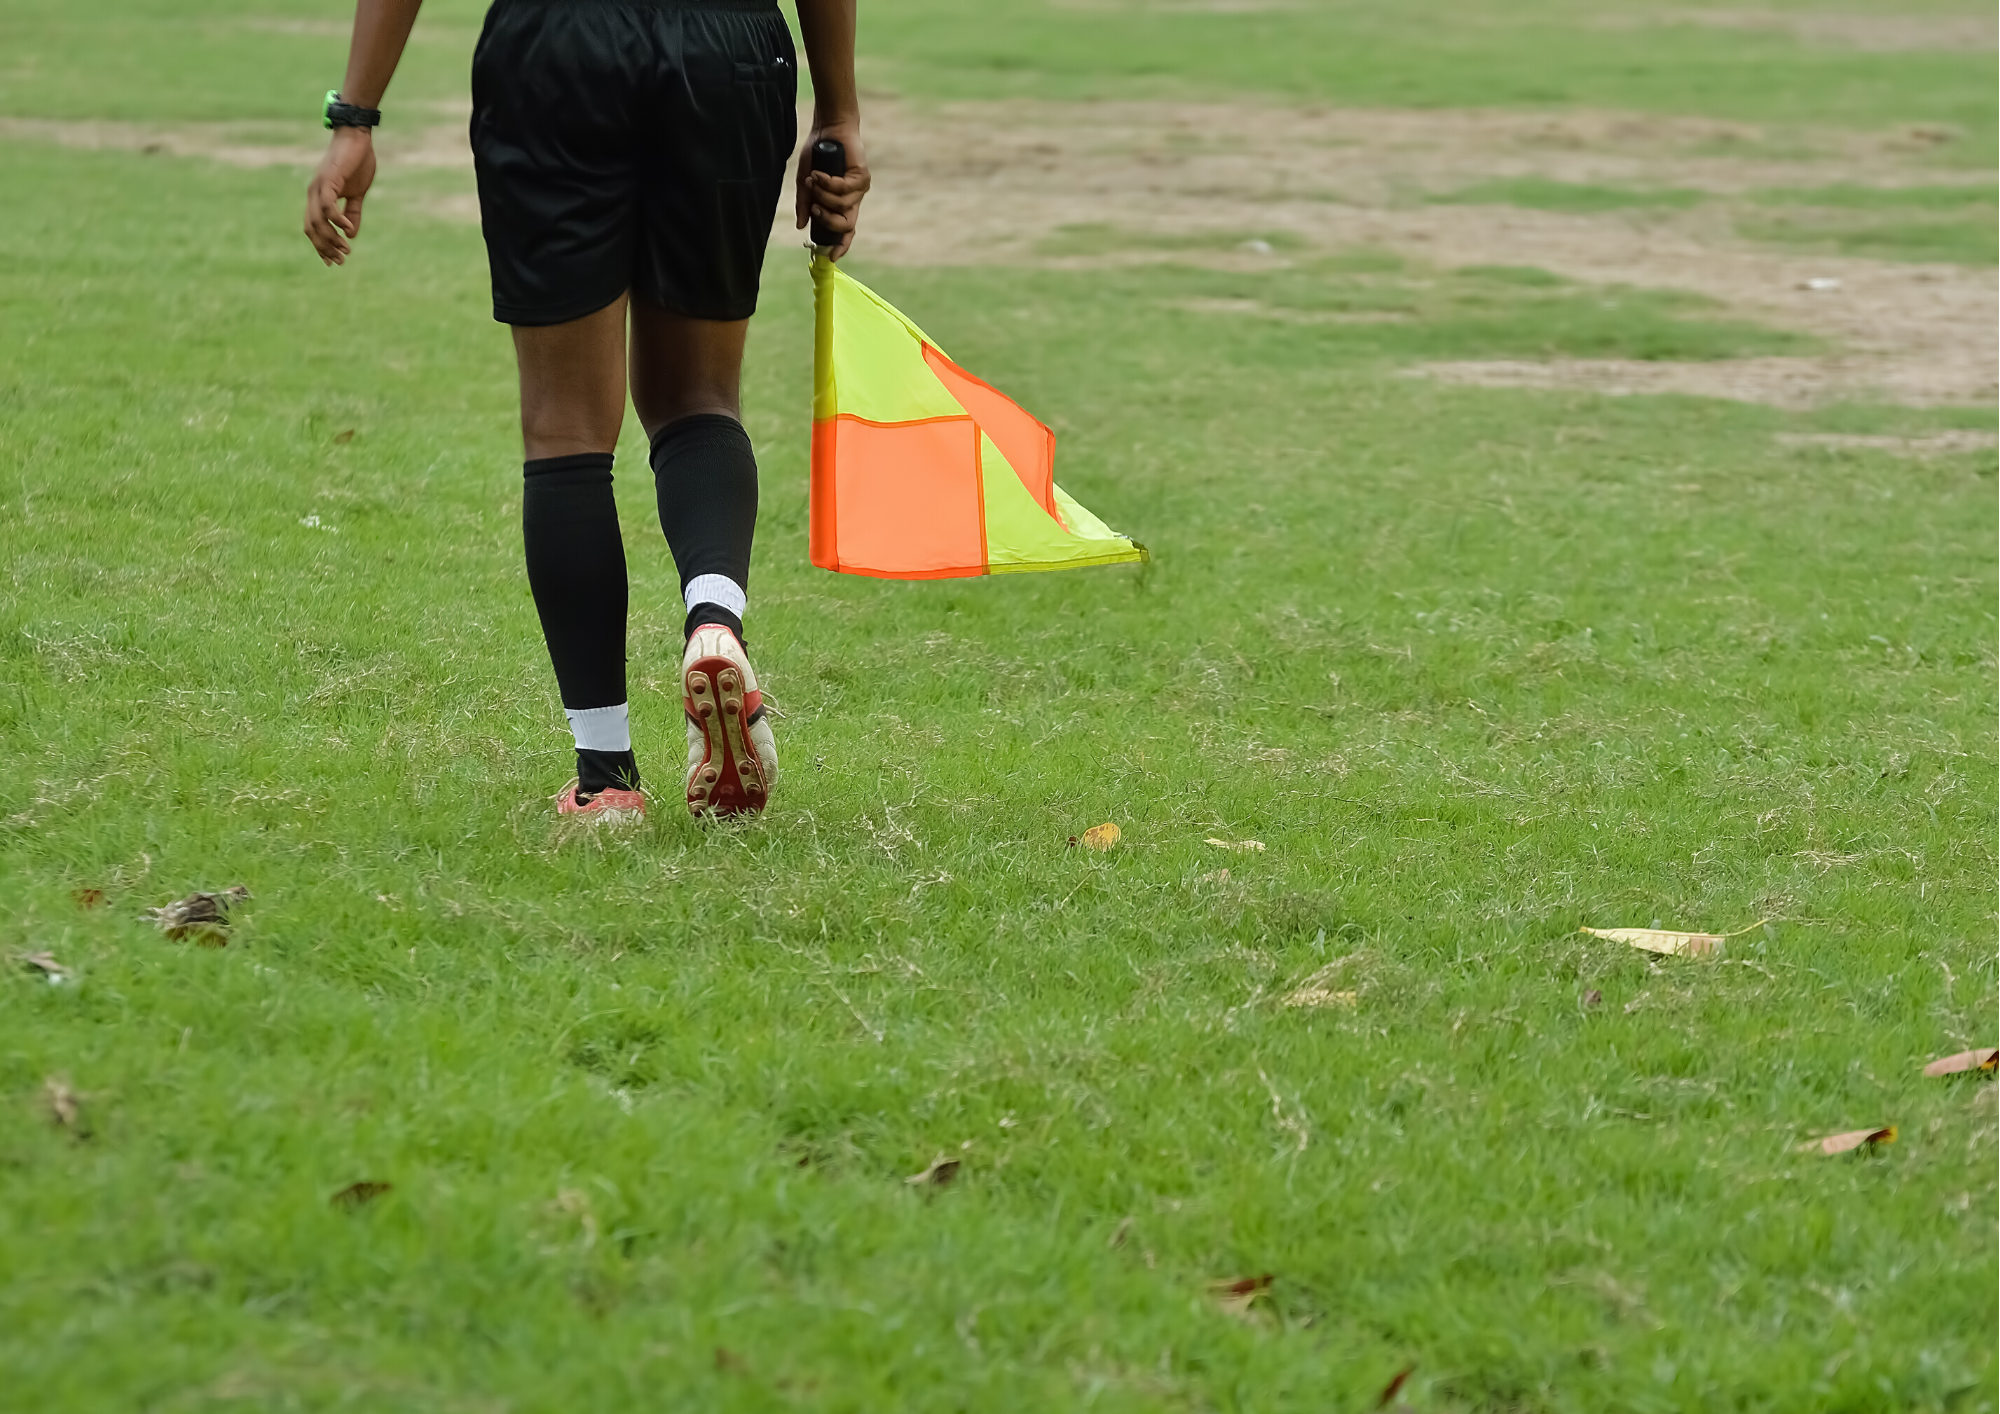 5 Ways to Better Engage Referees